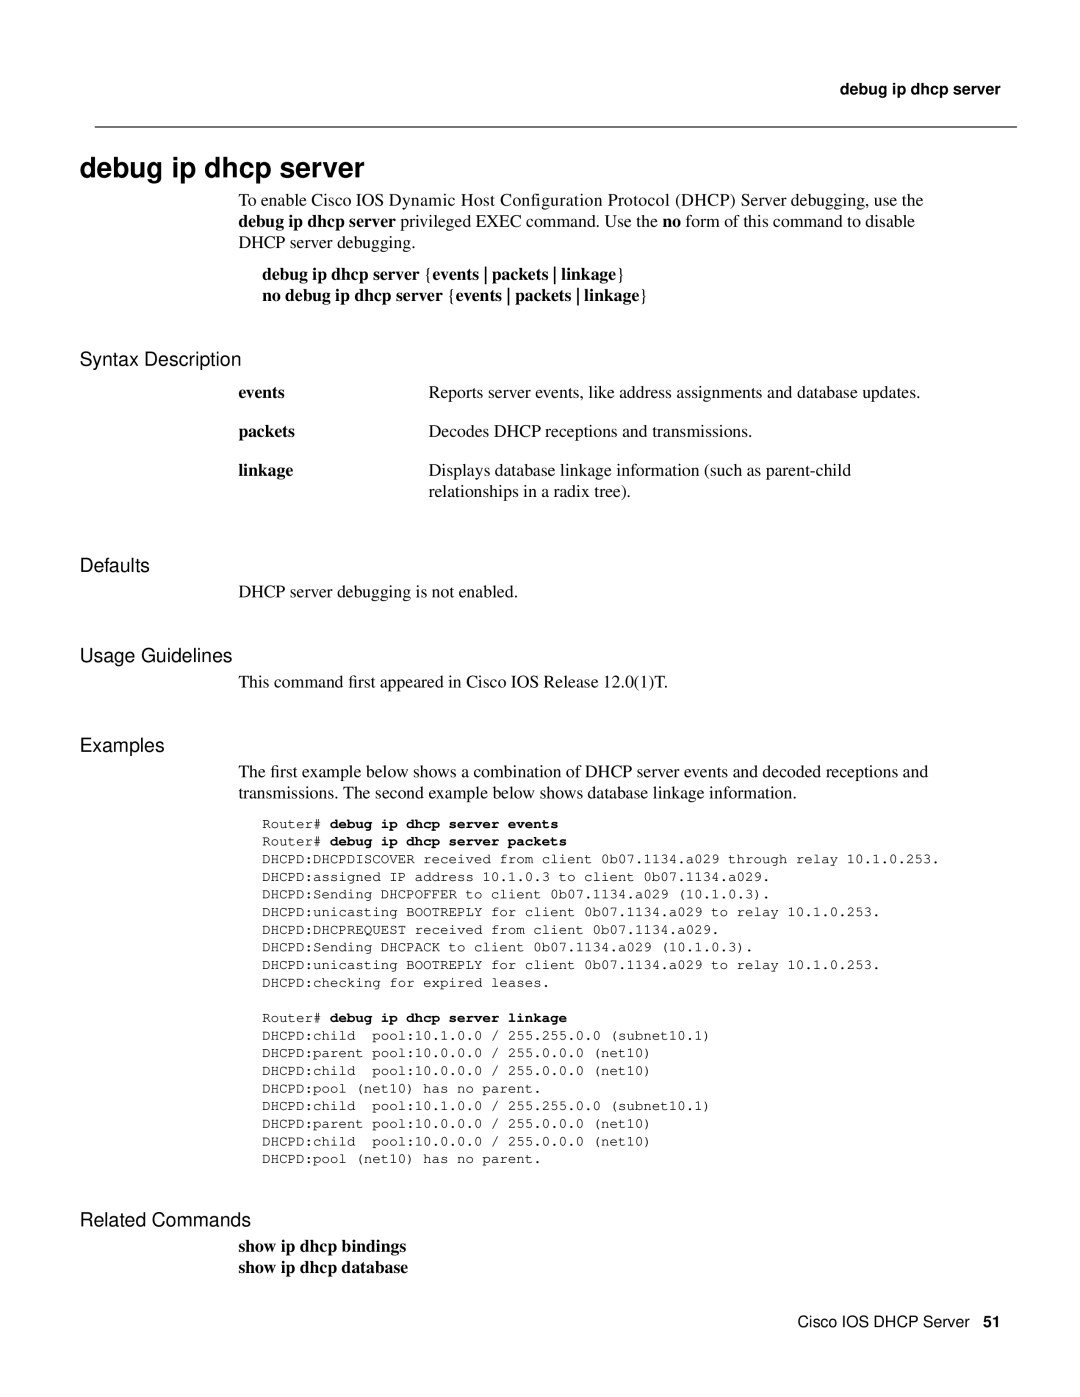 Cisco Systems 32369 debug ip dhcp server, events, packets, linkage, show ip dhcp bindings show ip dhcp database, Defaults 